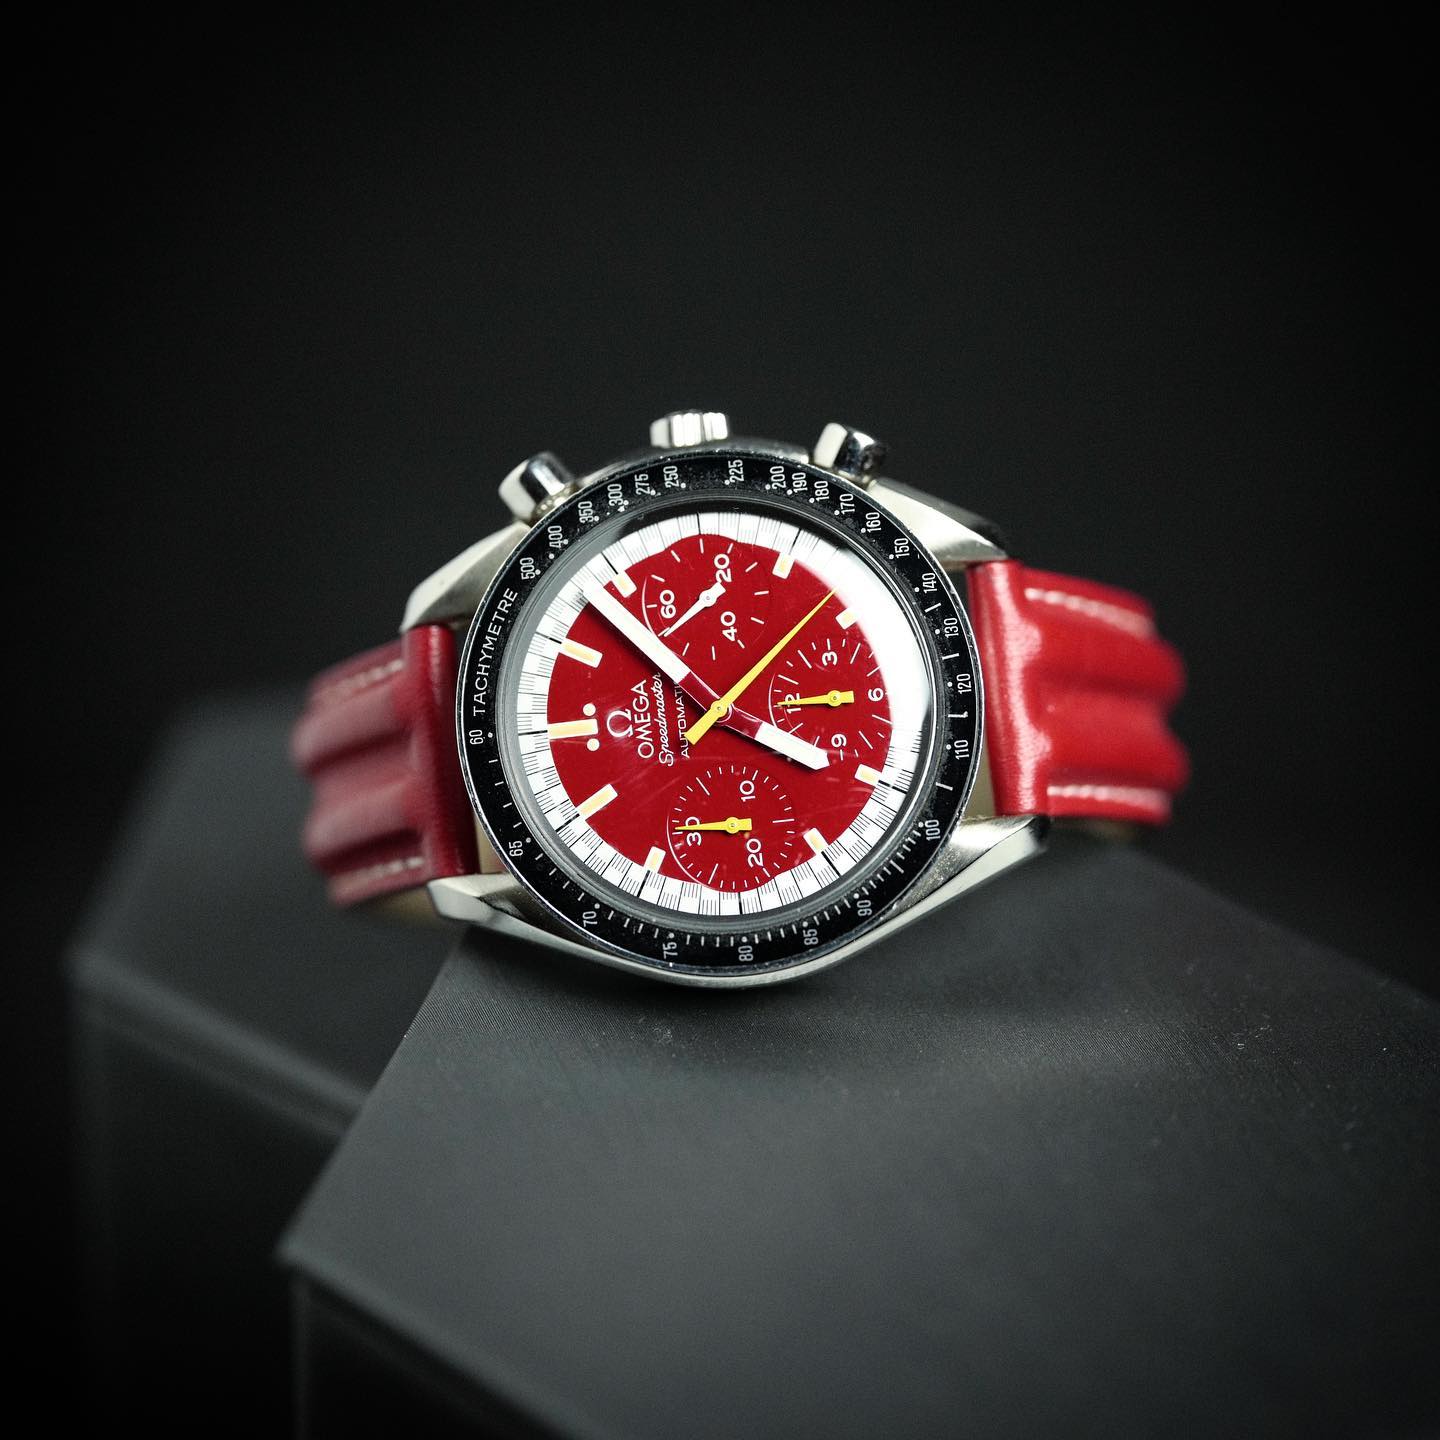 Schumacher red dial (Ferrari). Outer ring along the seconds track in a black-and-white “racing” pattern. Chronograph hands in yellow. Hour, minute and seconds hand in white. Omega Speedmaster Reduced 3810.61.41